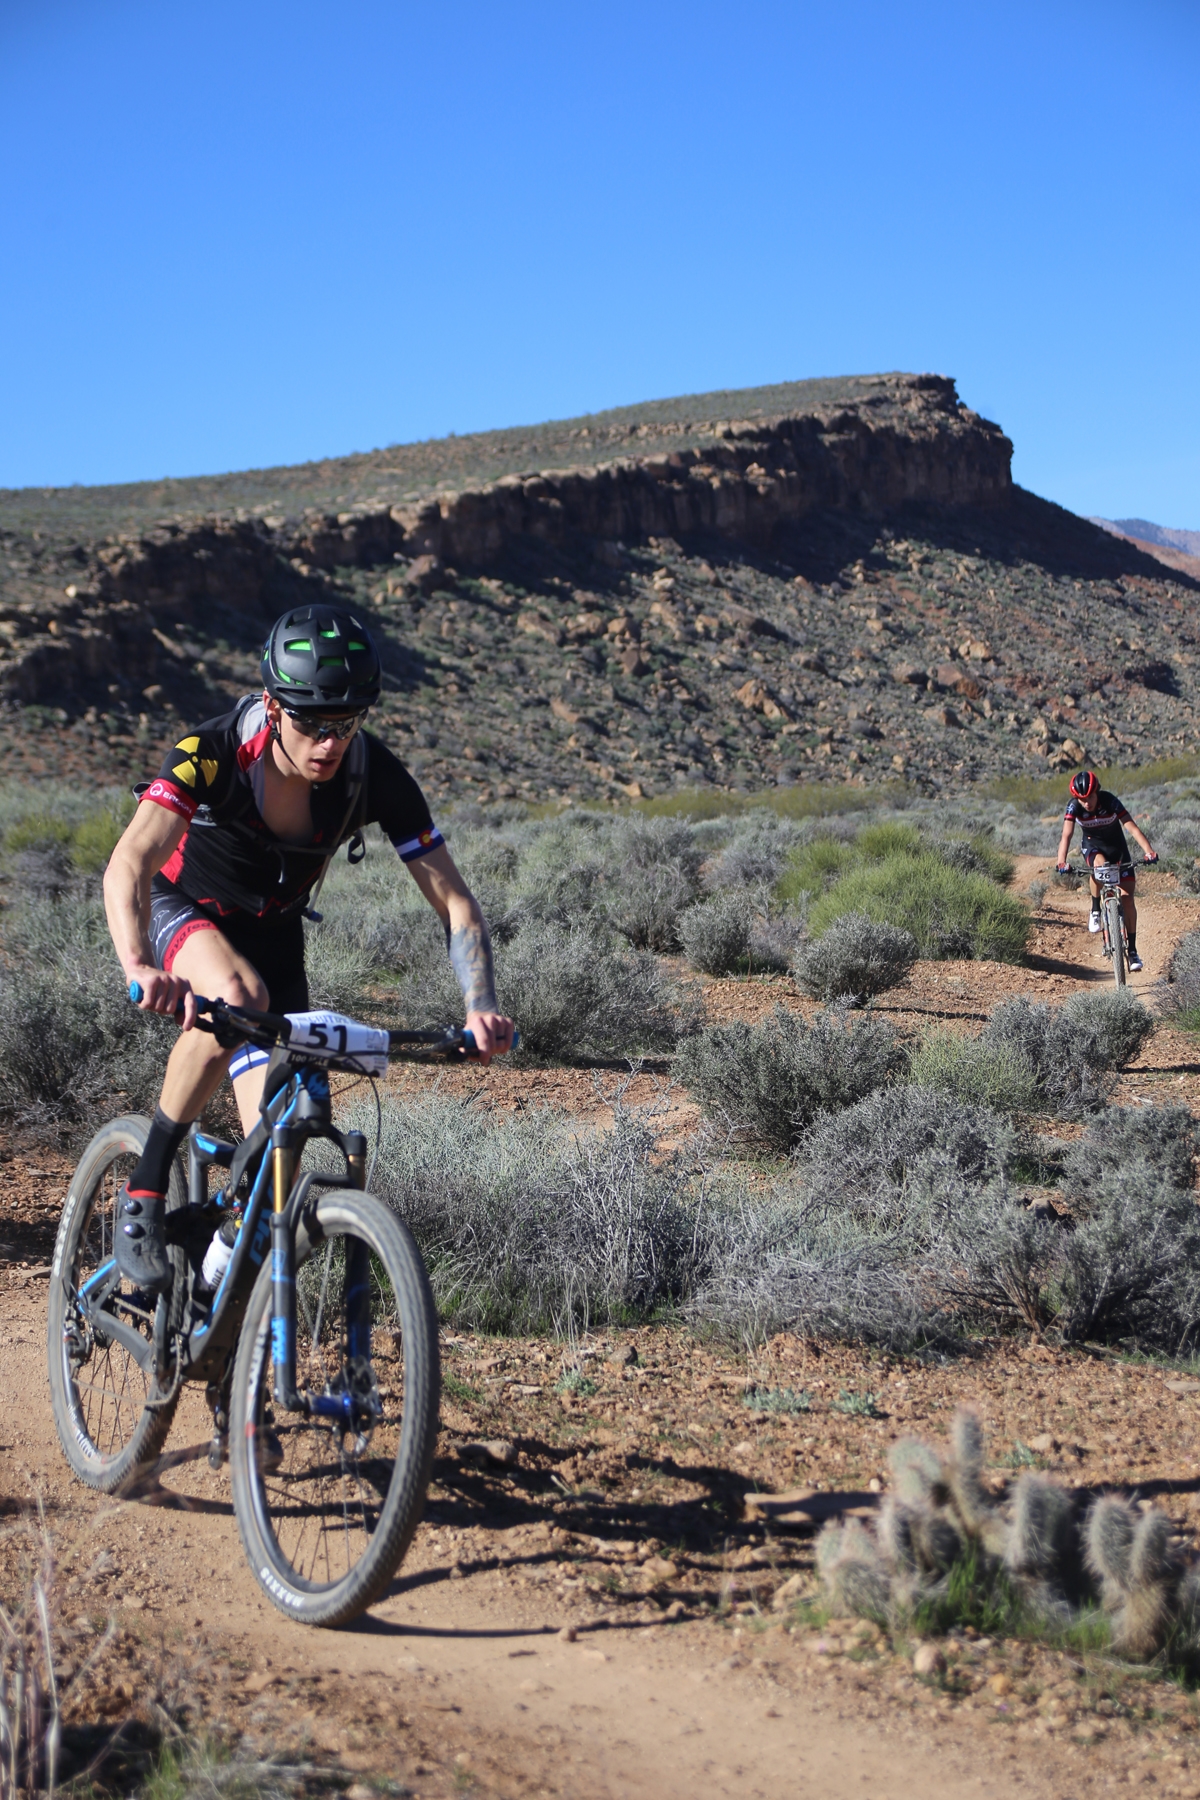 Taylor Lideen on his way to winning the 100 mile race at the 2017 True Grit Mountain Bike Race. Photo by CrawlingSpider.com, find your photo from the race.